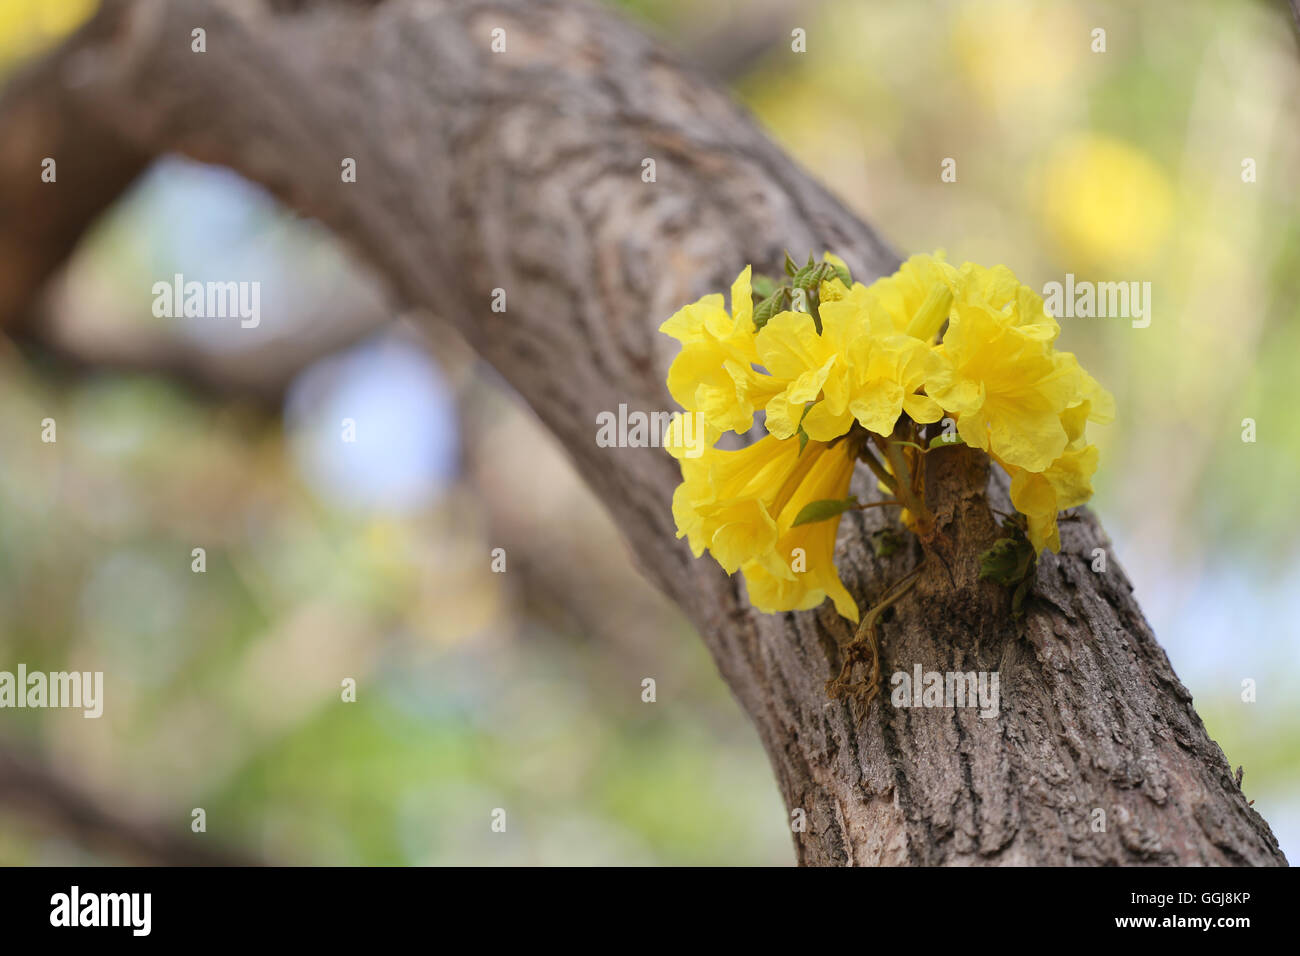 Tabebuia spectabilis flower or Yellow tabebuia flower bloom on tree in the garden,Tropical yellow flowers a species from India. Stock Photo